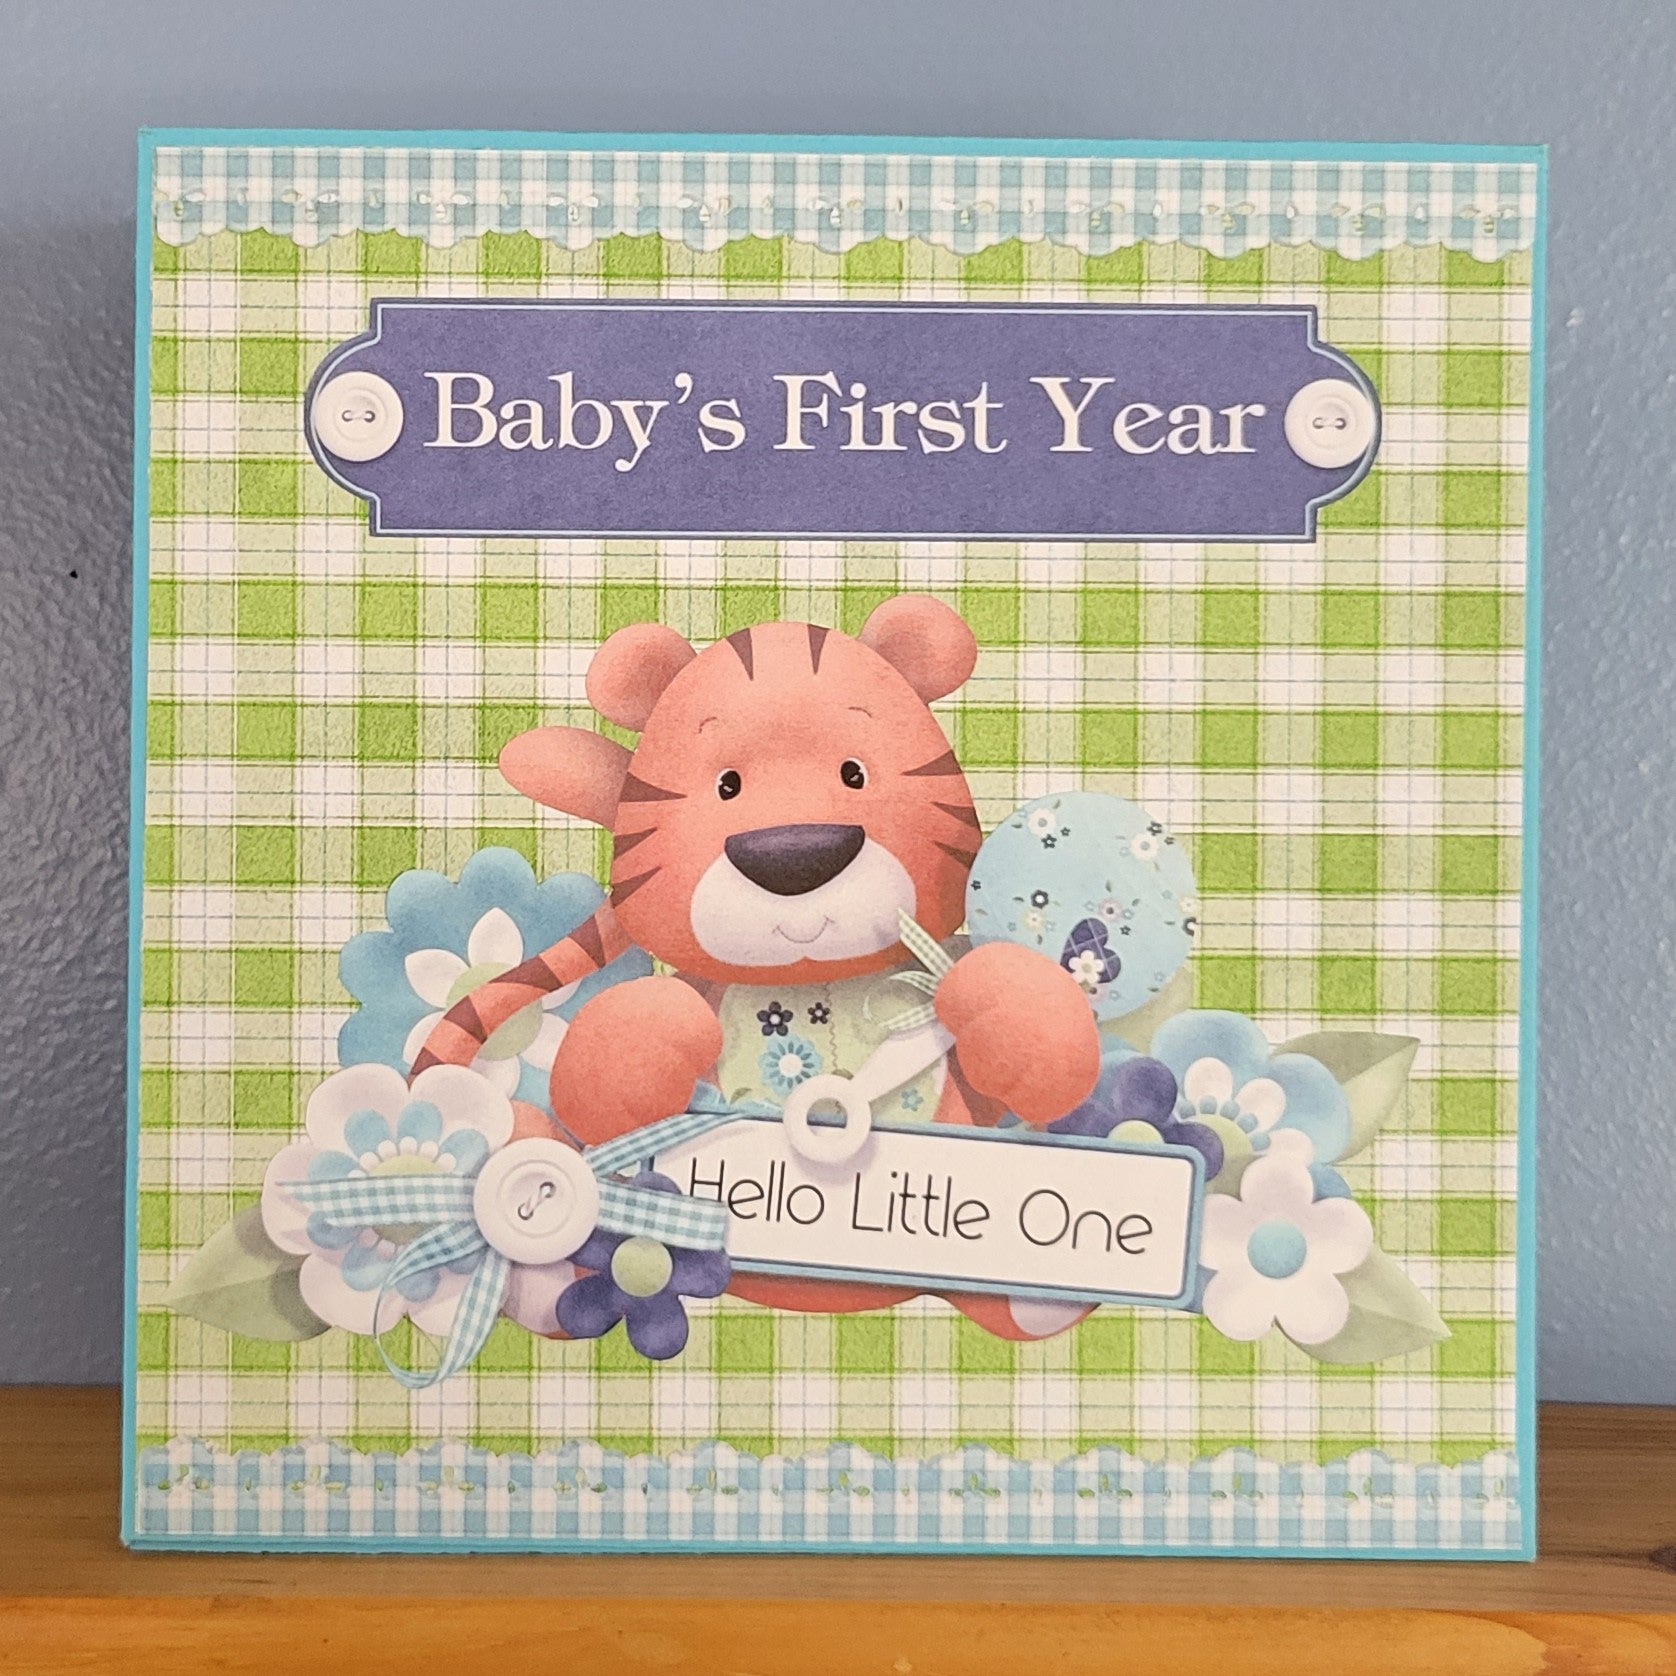 Baby's First Year Boy Accordion front cover.